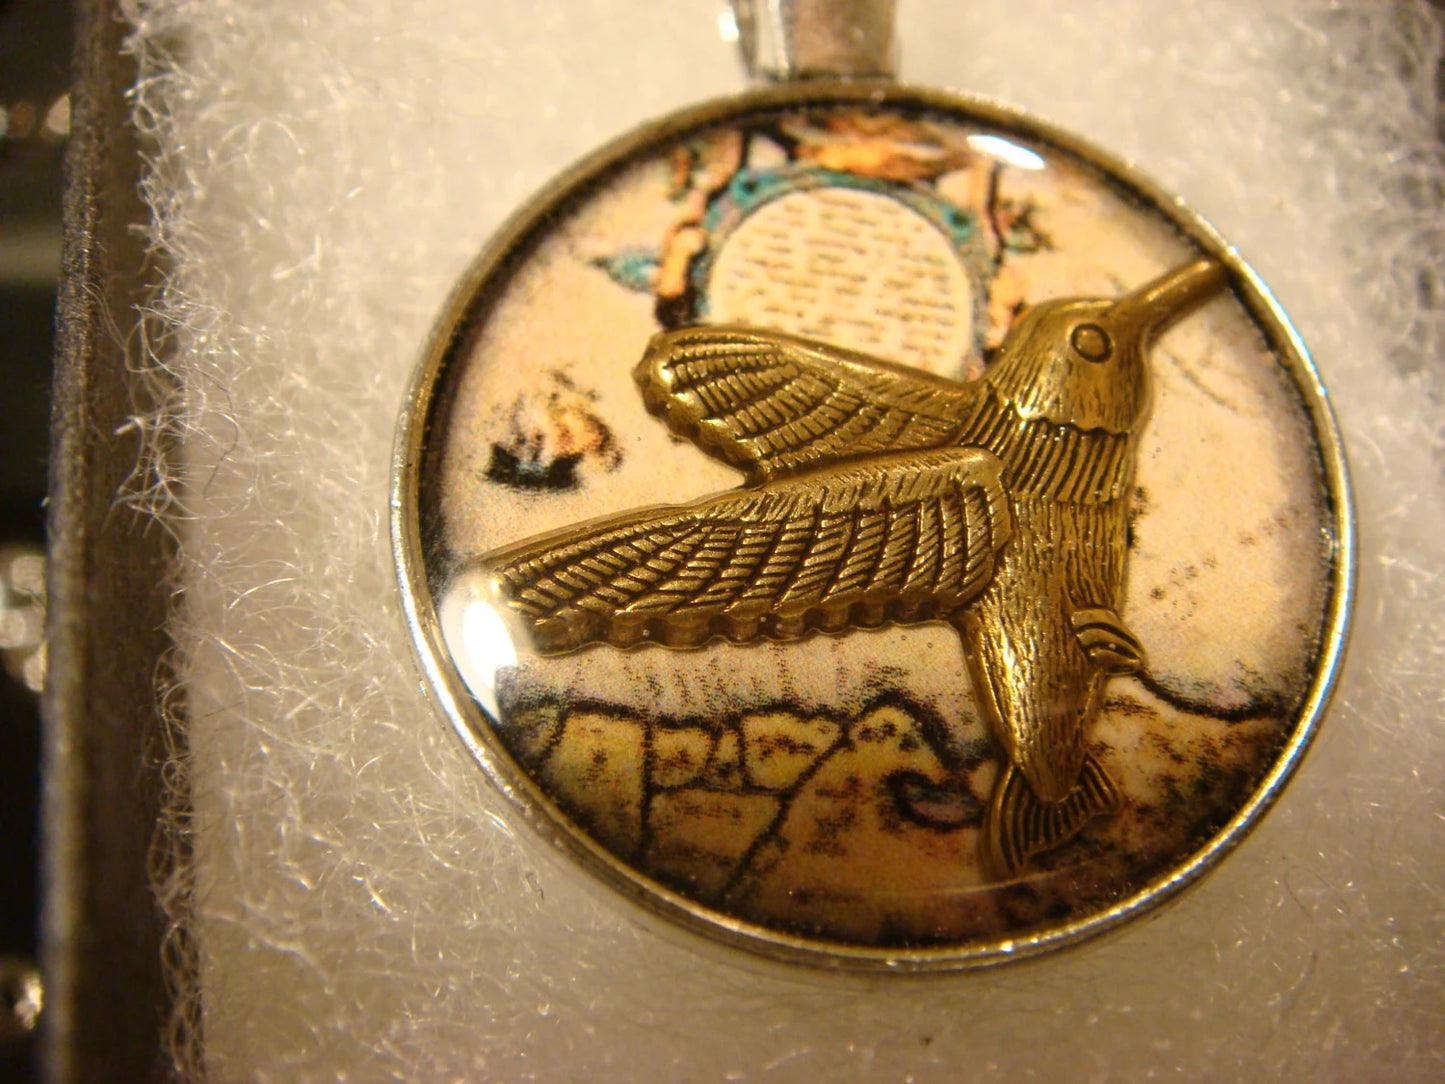 Hummingbird over Map Small Pendant Necklace